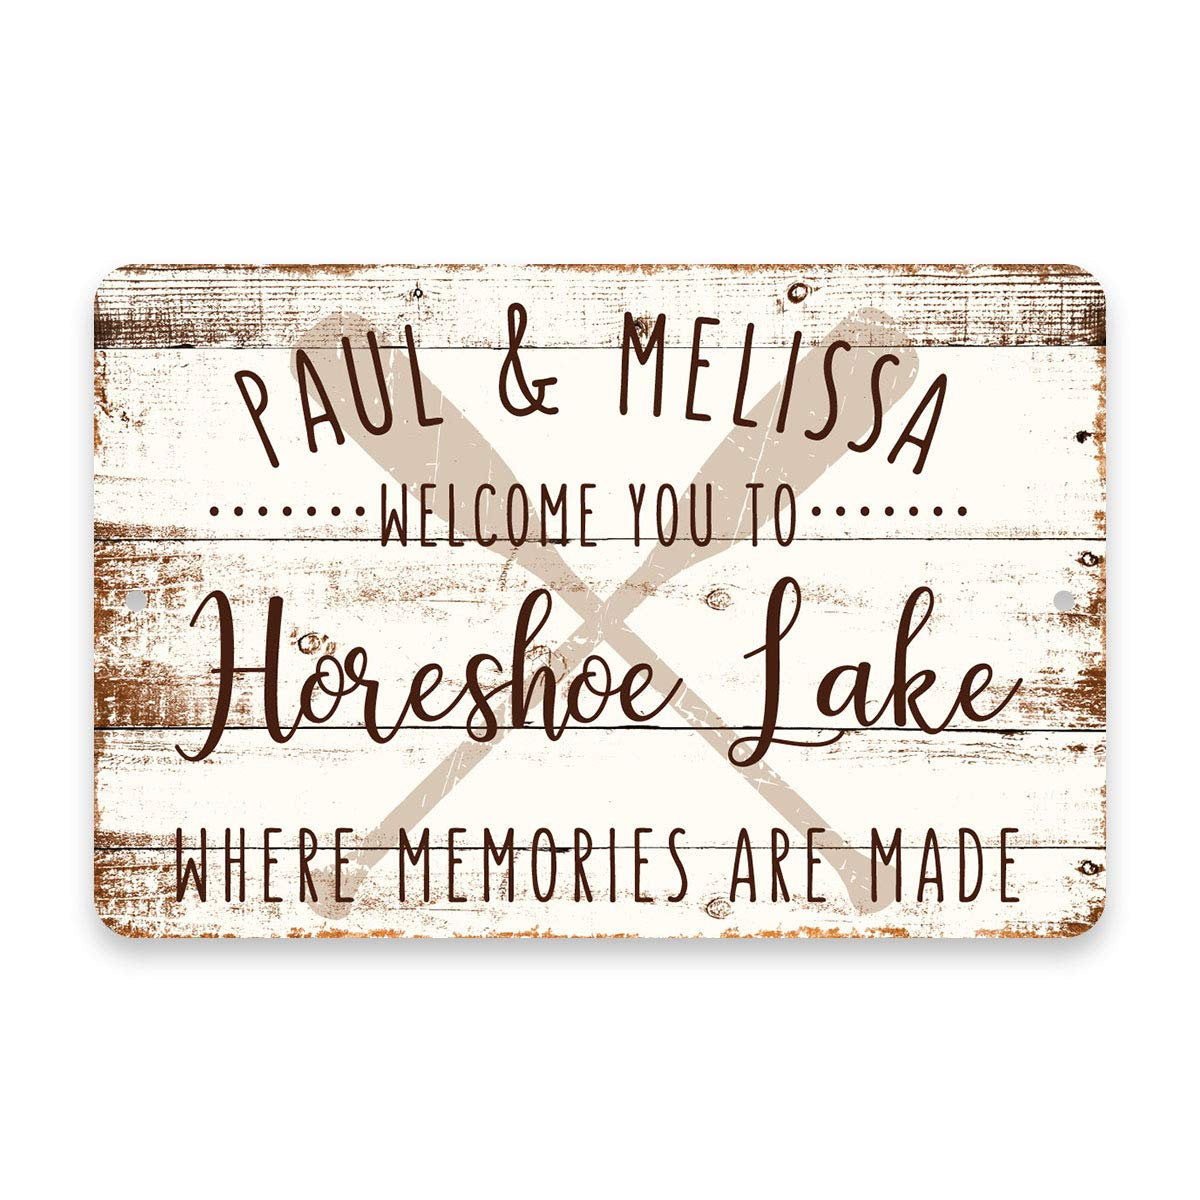 Personalized Welcome to Horeshoe Lake Where Memories are Made Sign - 8 X 12 Metal Sign with Wood Look